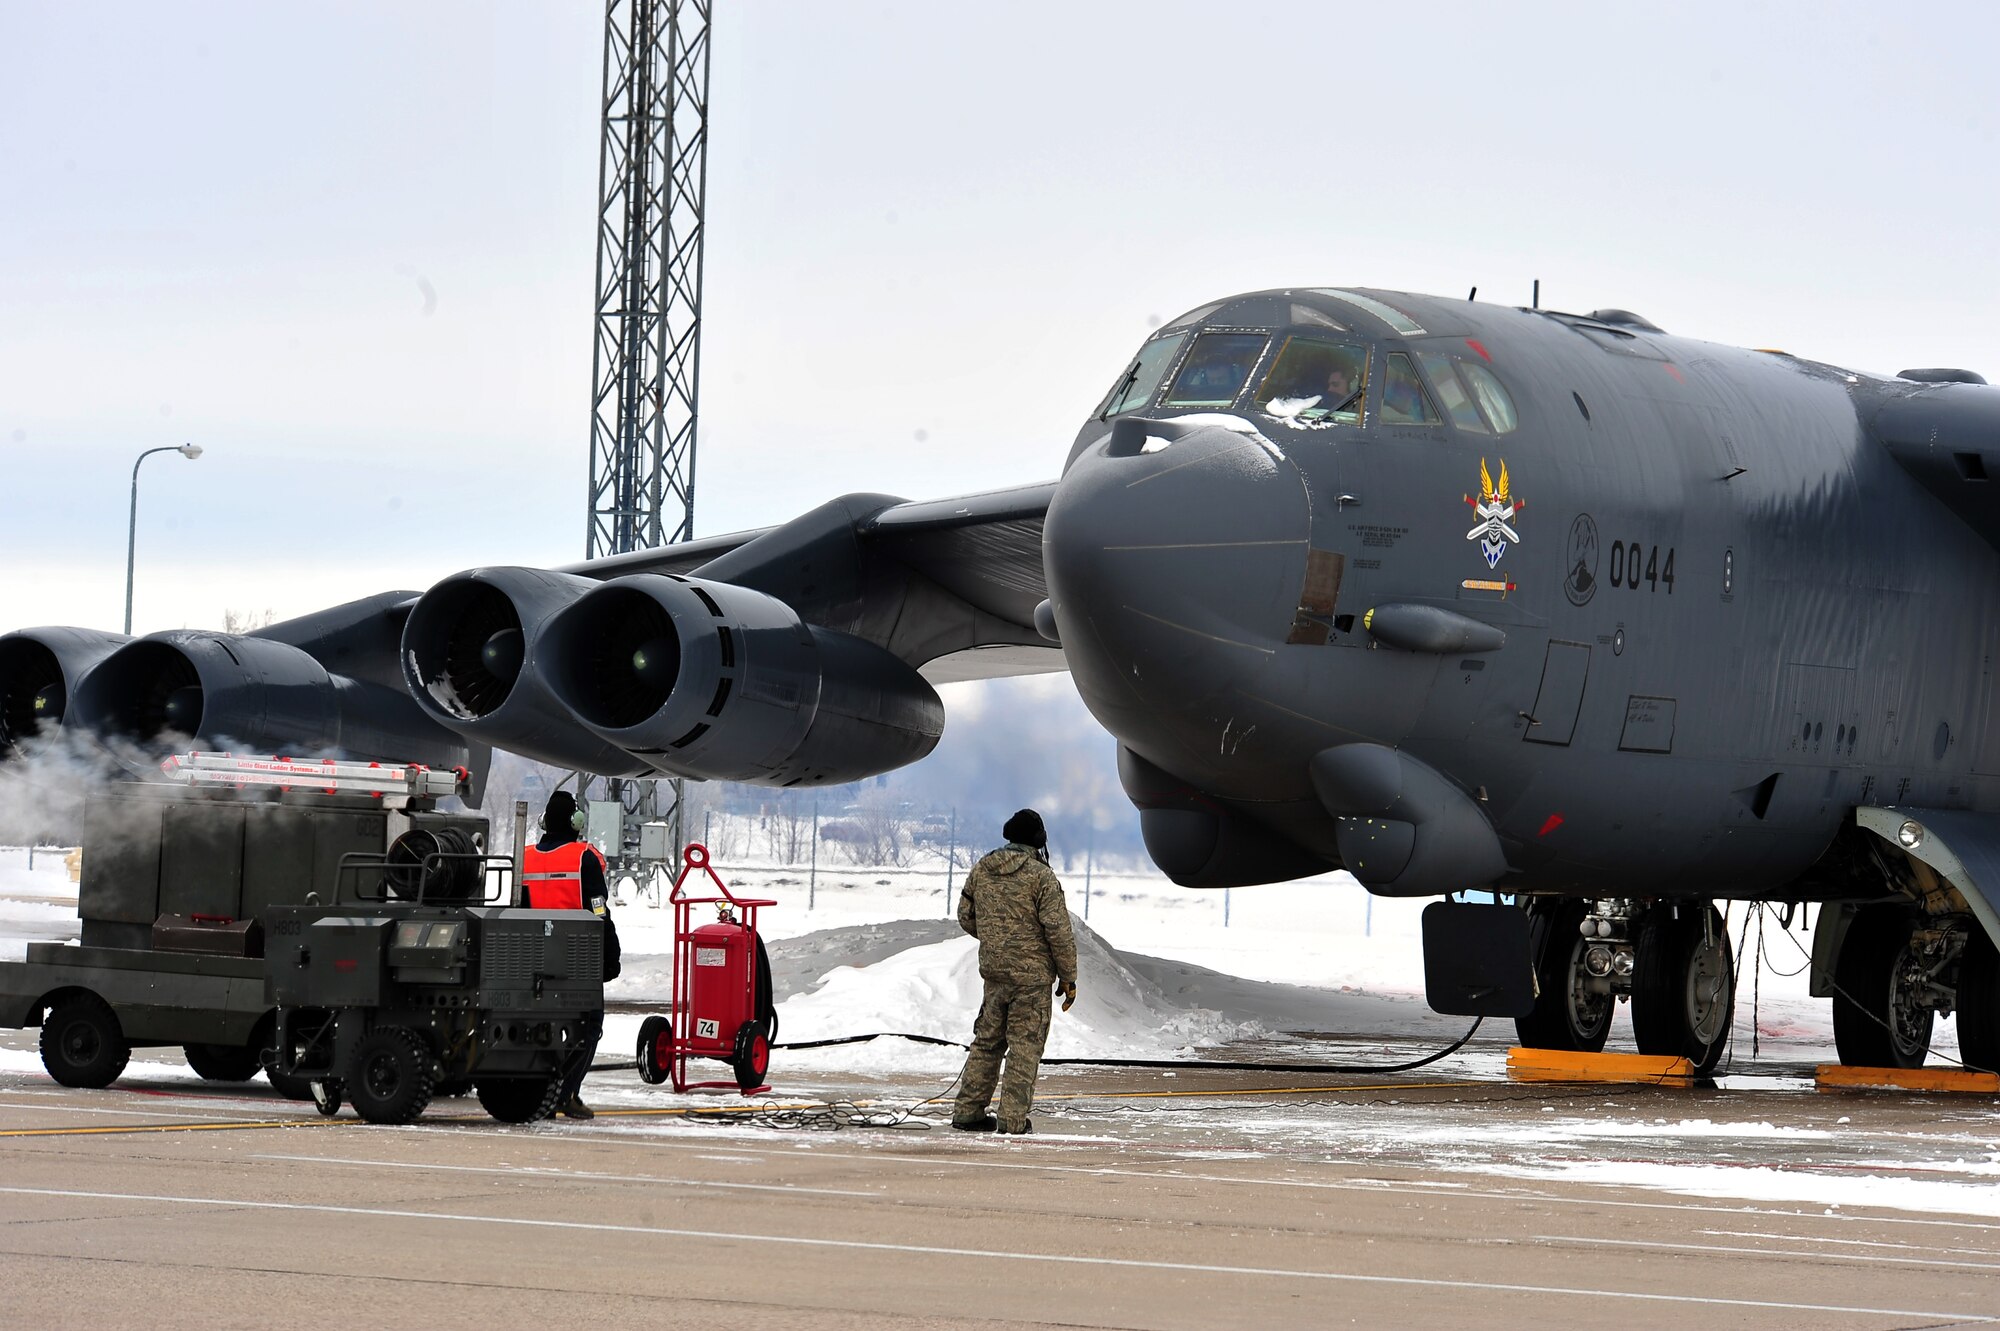 Minot cold weather gear regulations > Minot Air Force Base > Article Display